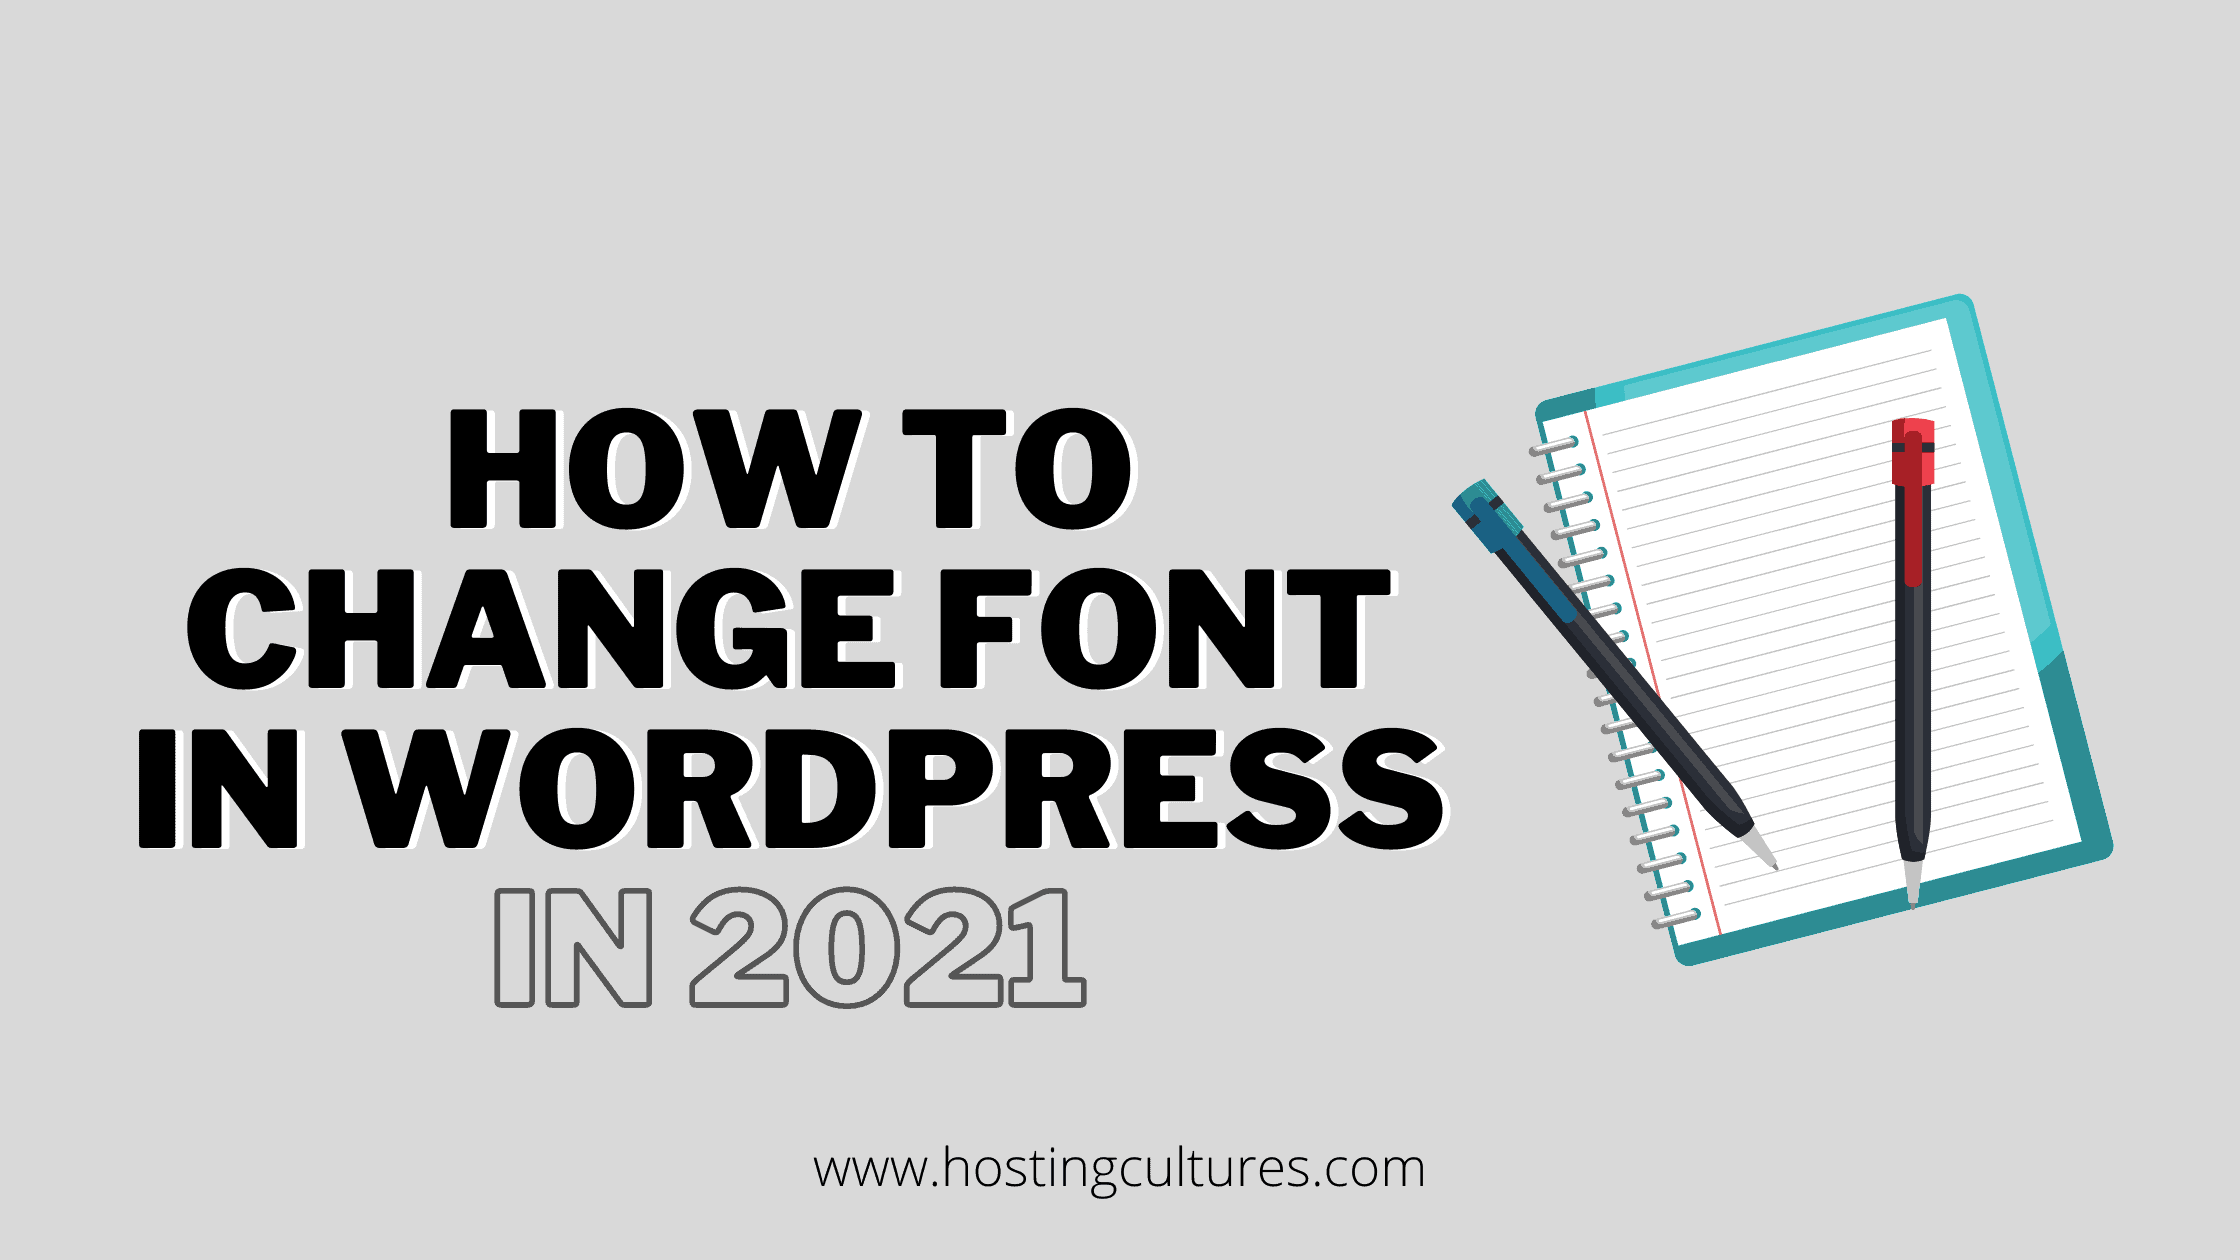 How to change font in wordpress in 2021